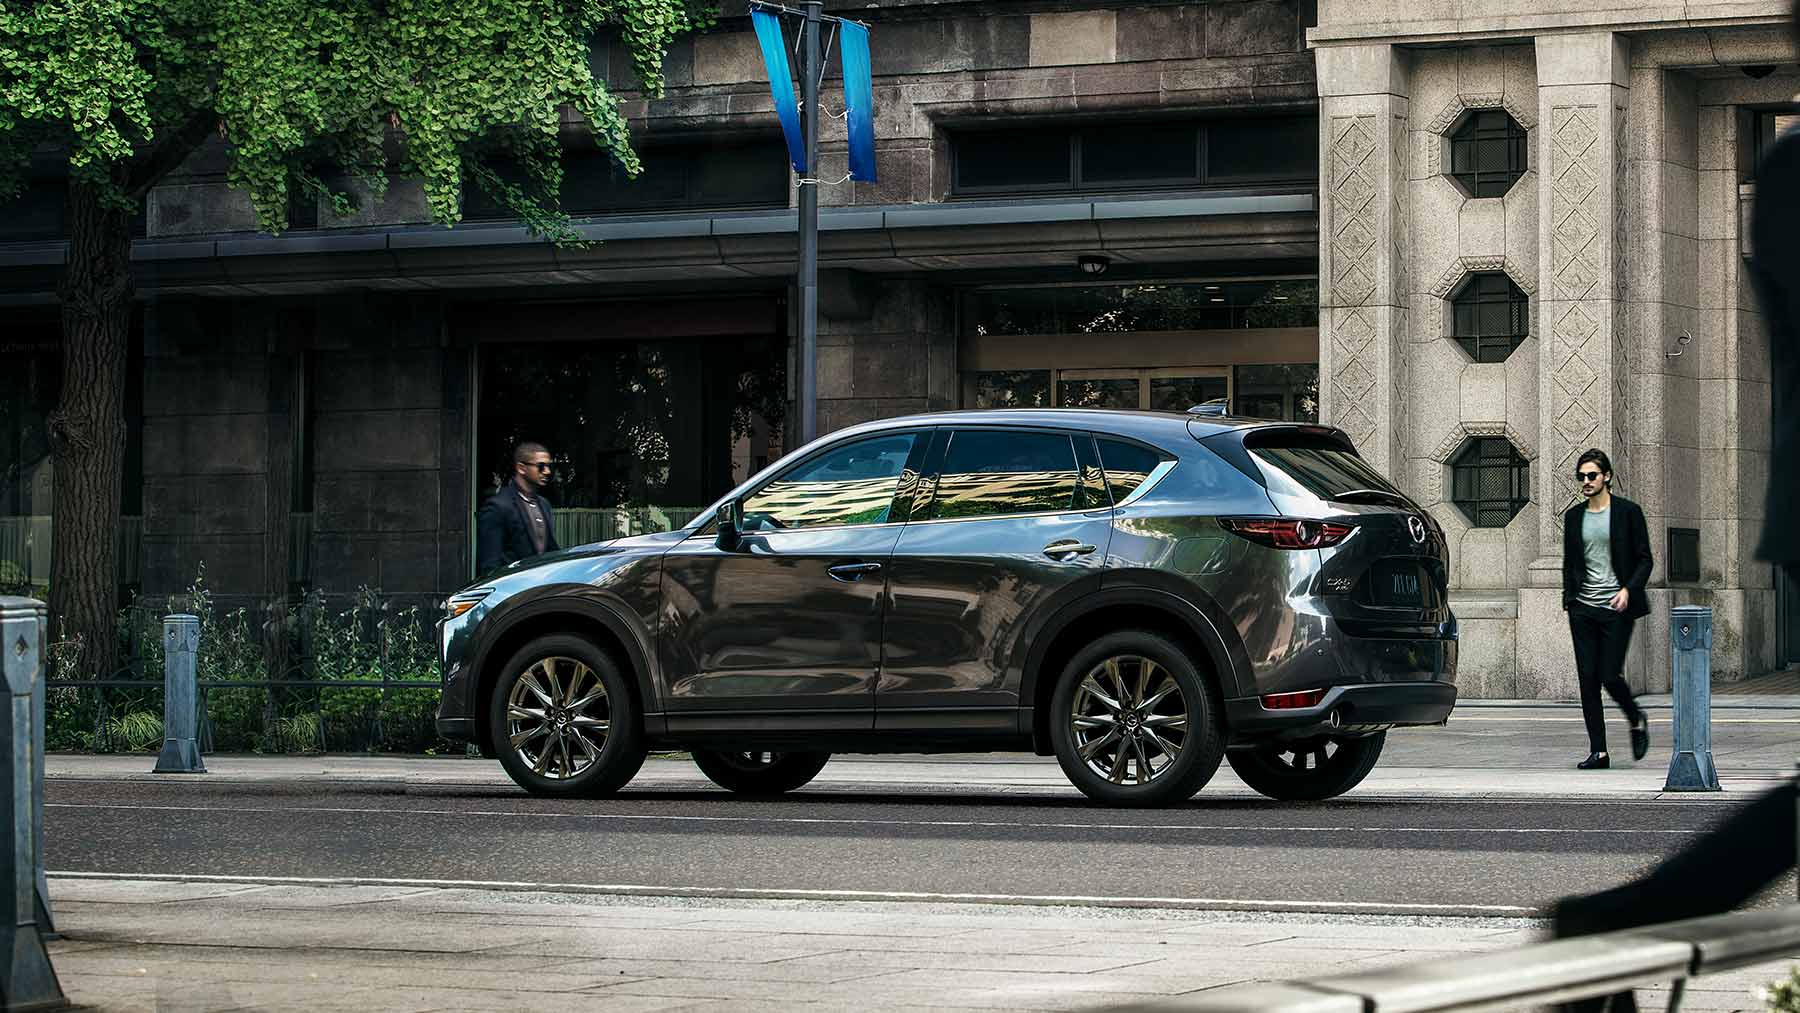 2020 Mazda CX-5 Overview - The News Wheel